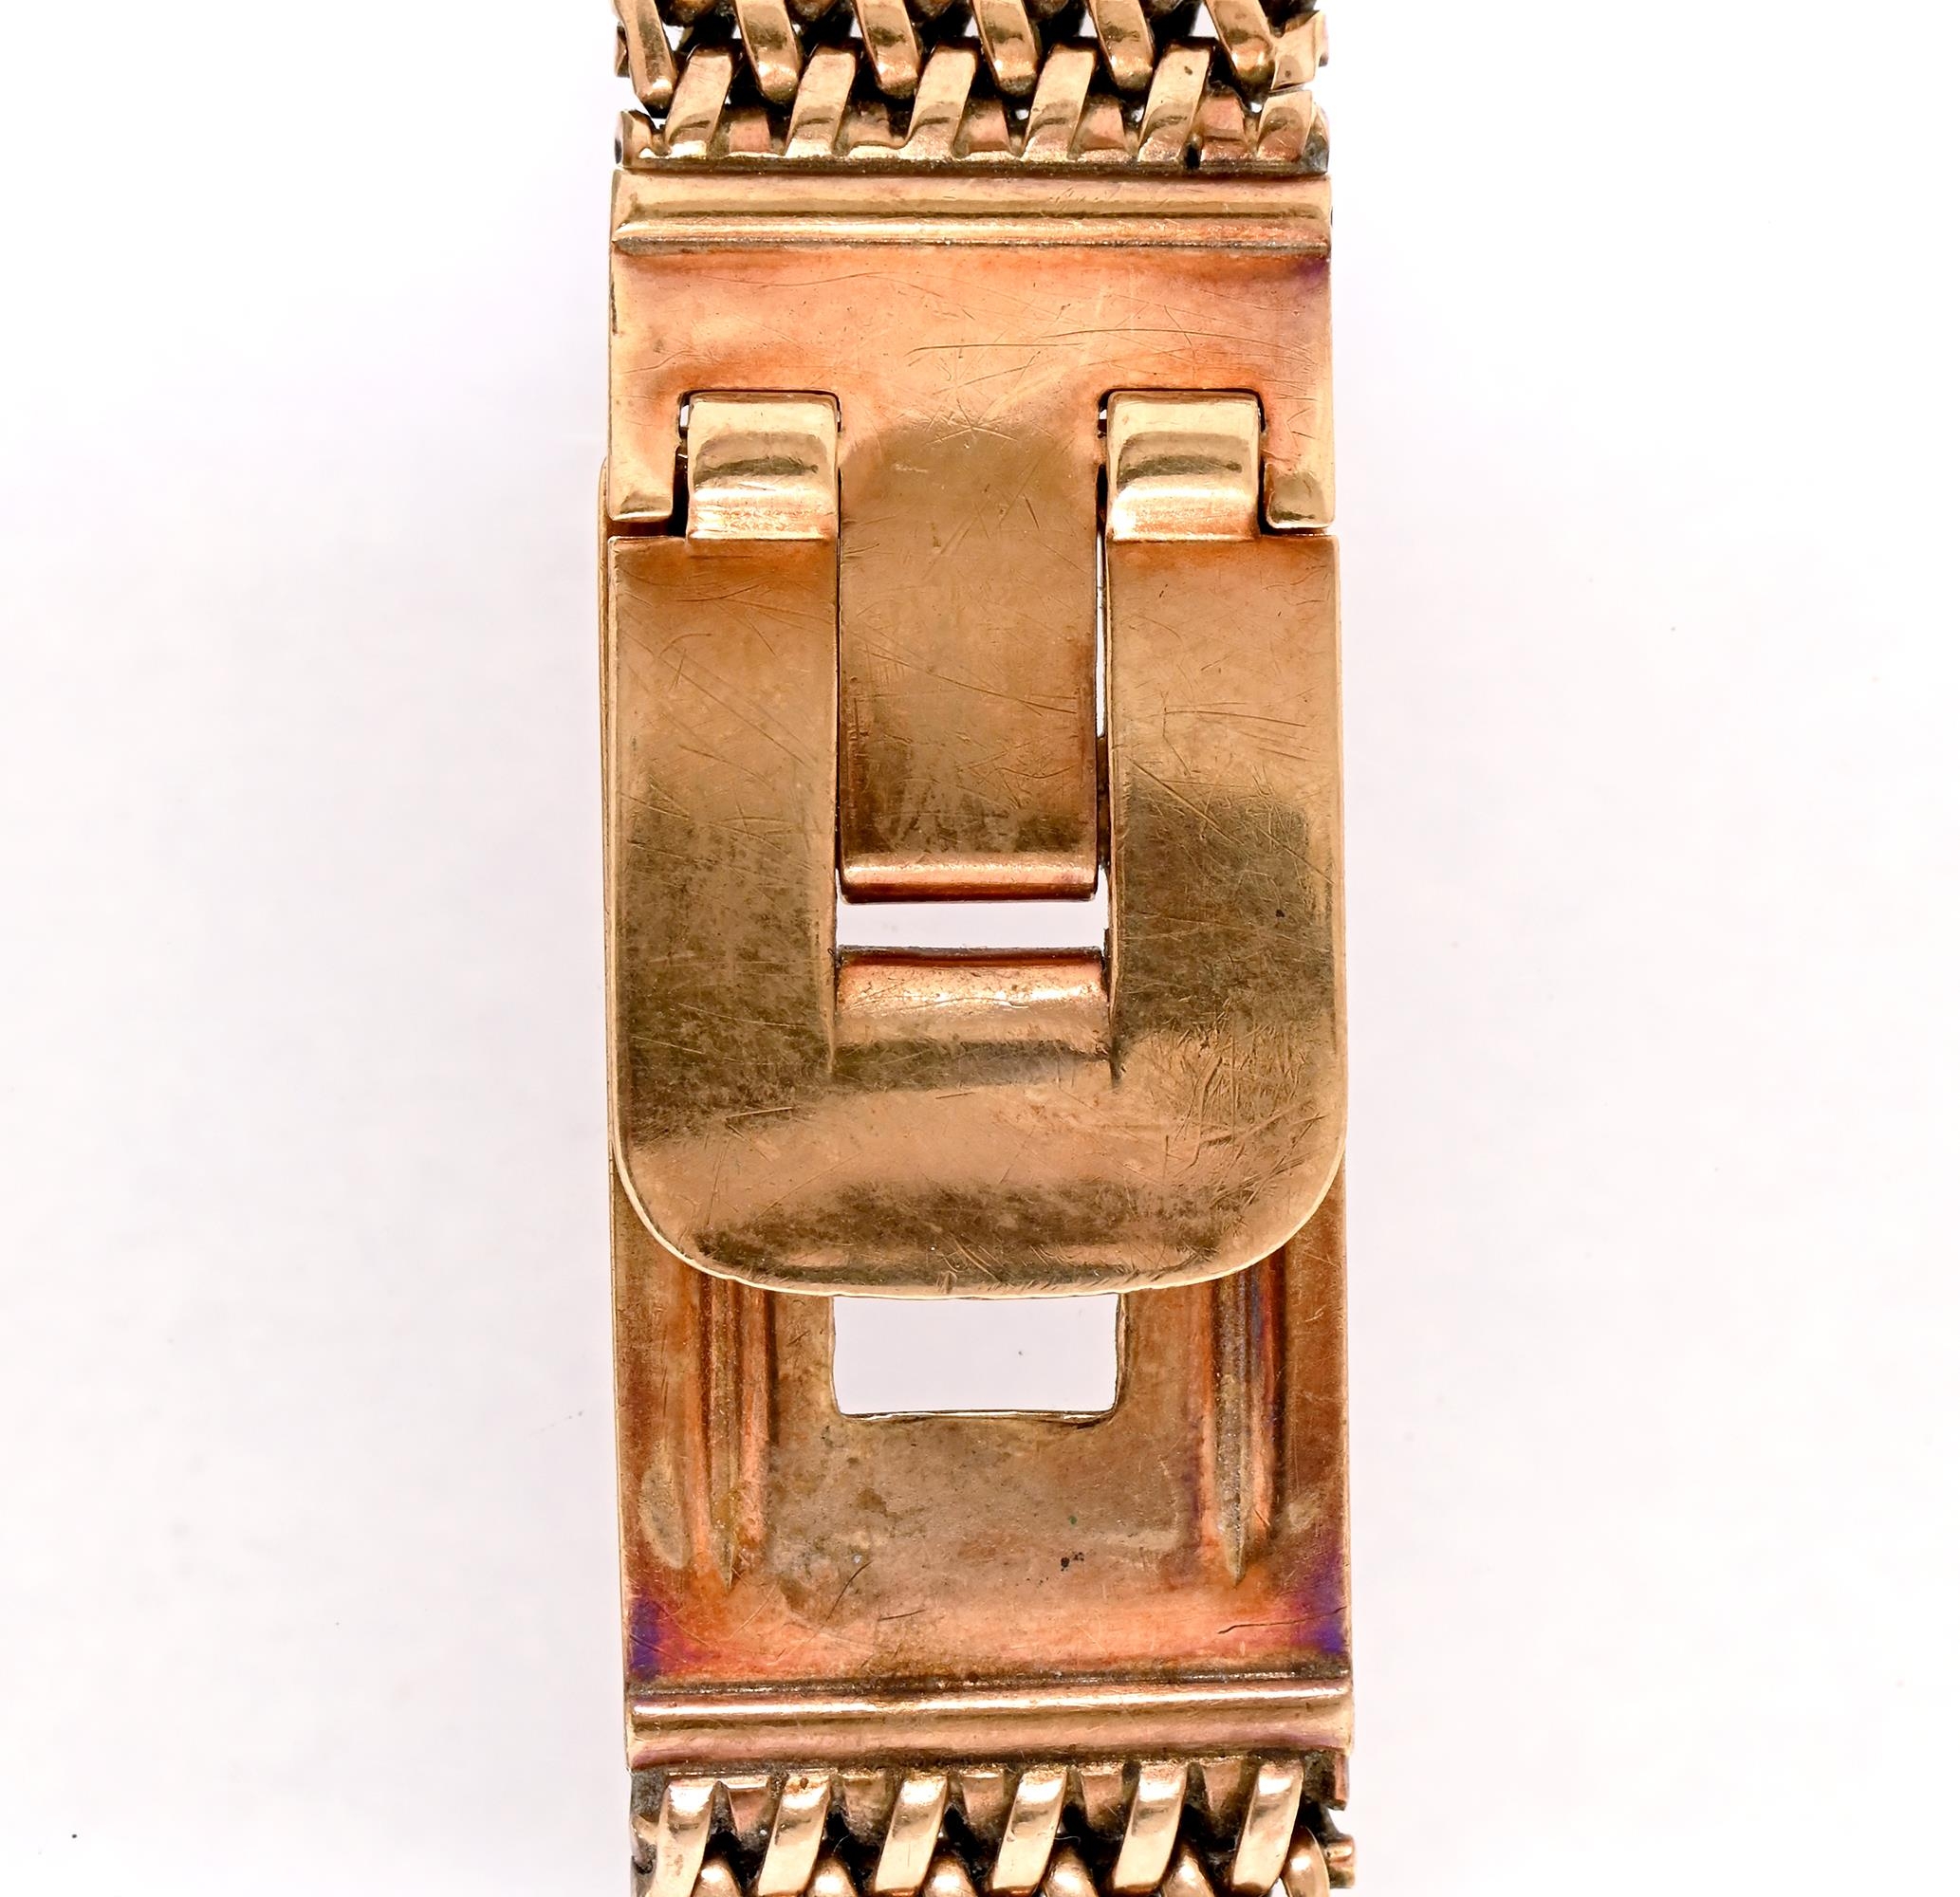 A Jaeger LeCoultre 18ct gold gentleman’s wristwatch, No 382652, calibre P450/46 movement, with - Image 3 of 3